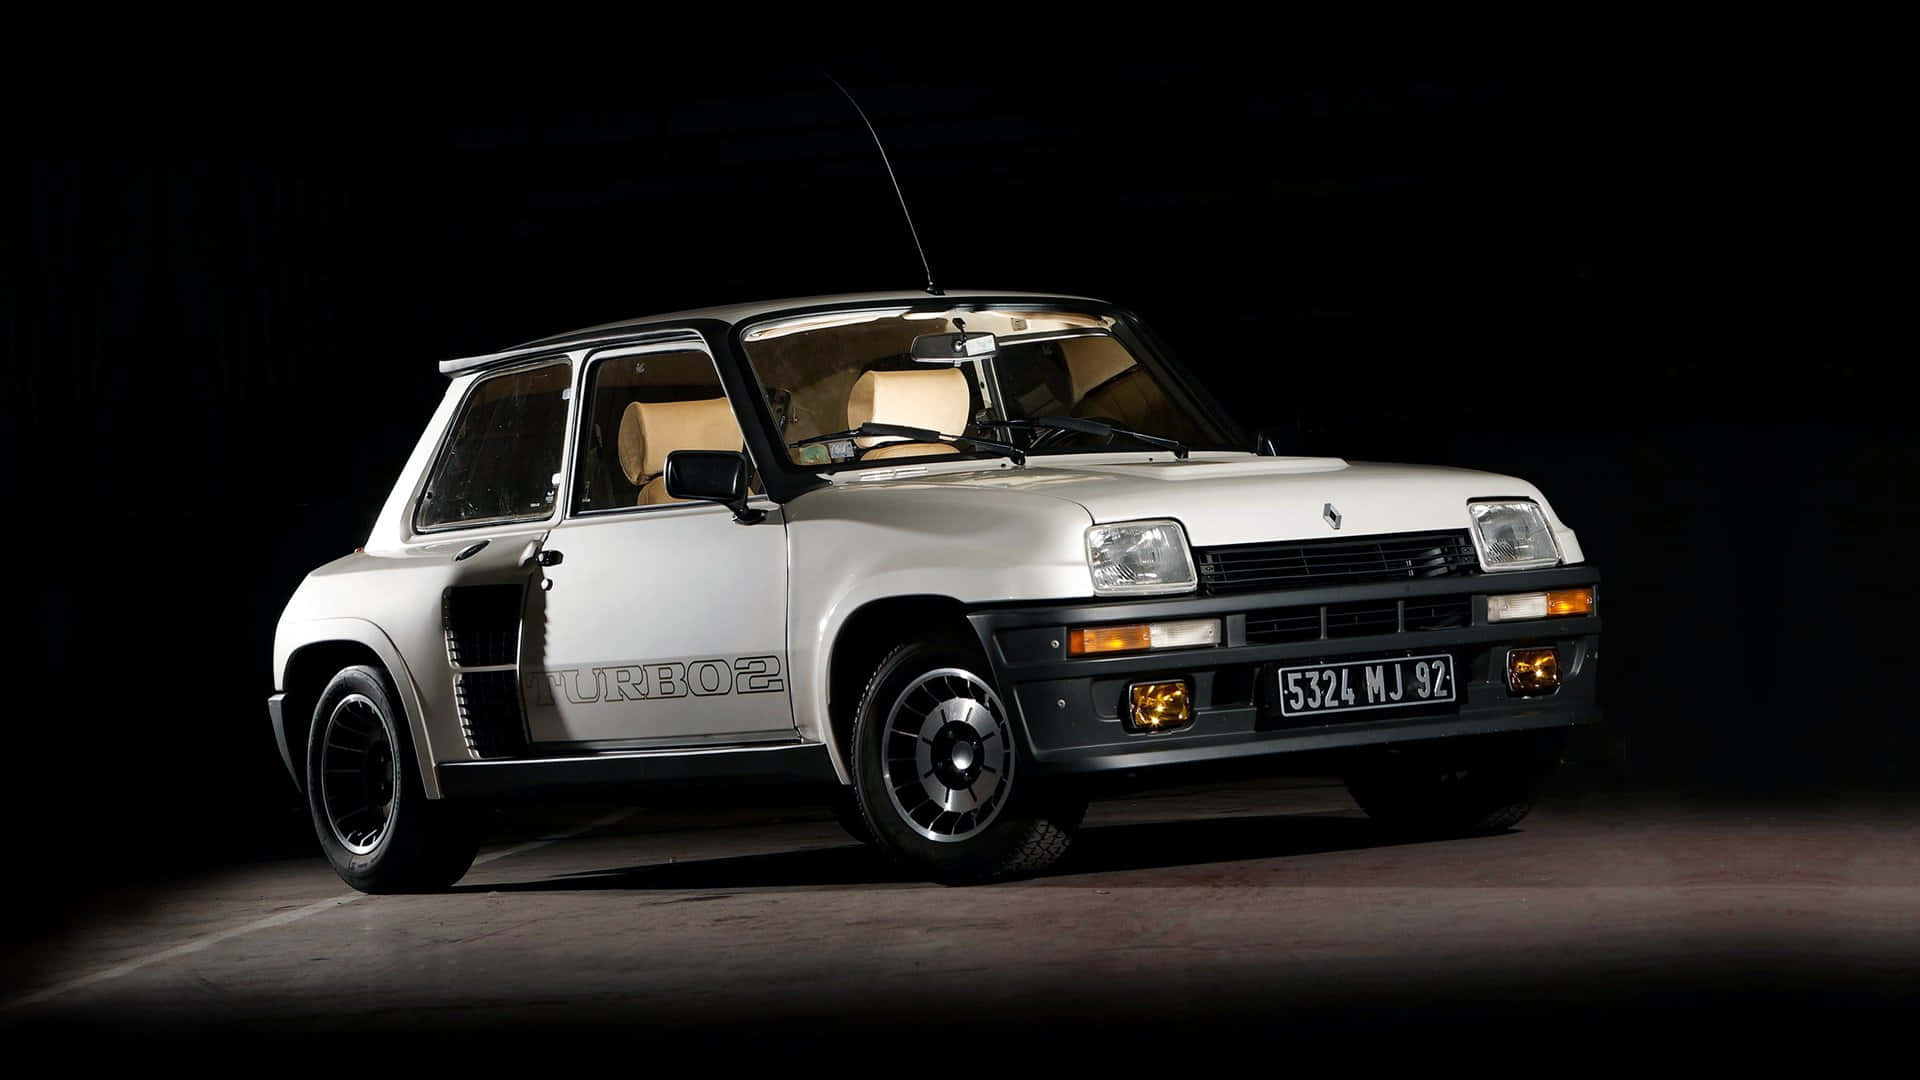 Iconic Renault 5 Turbo in Action Wallpaper